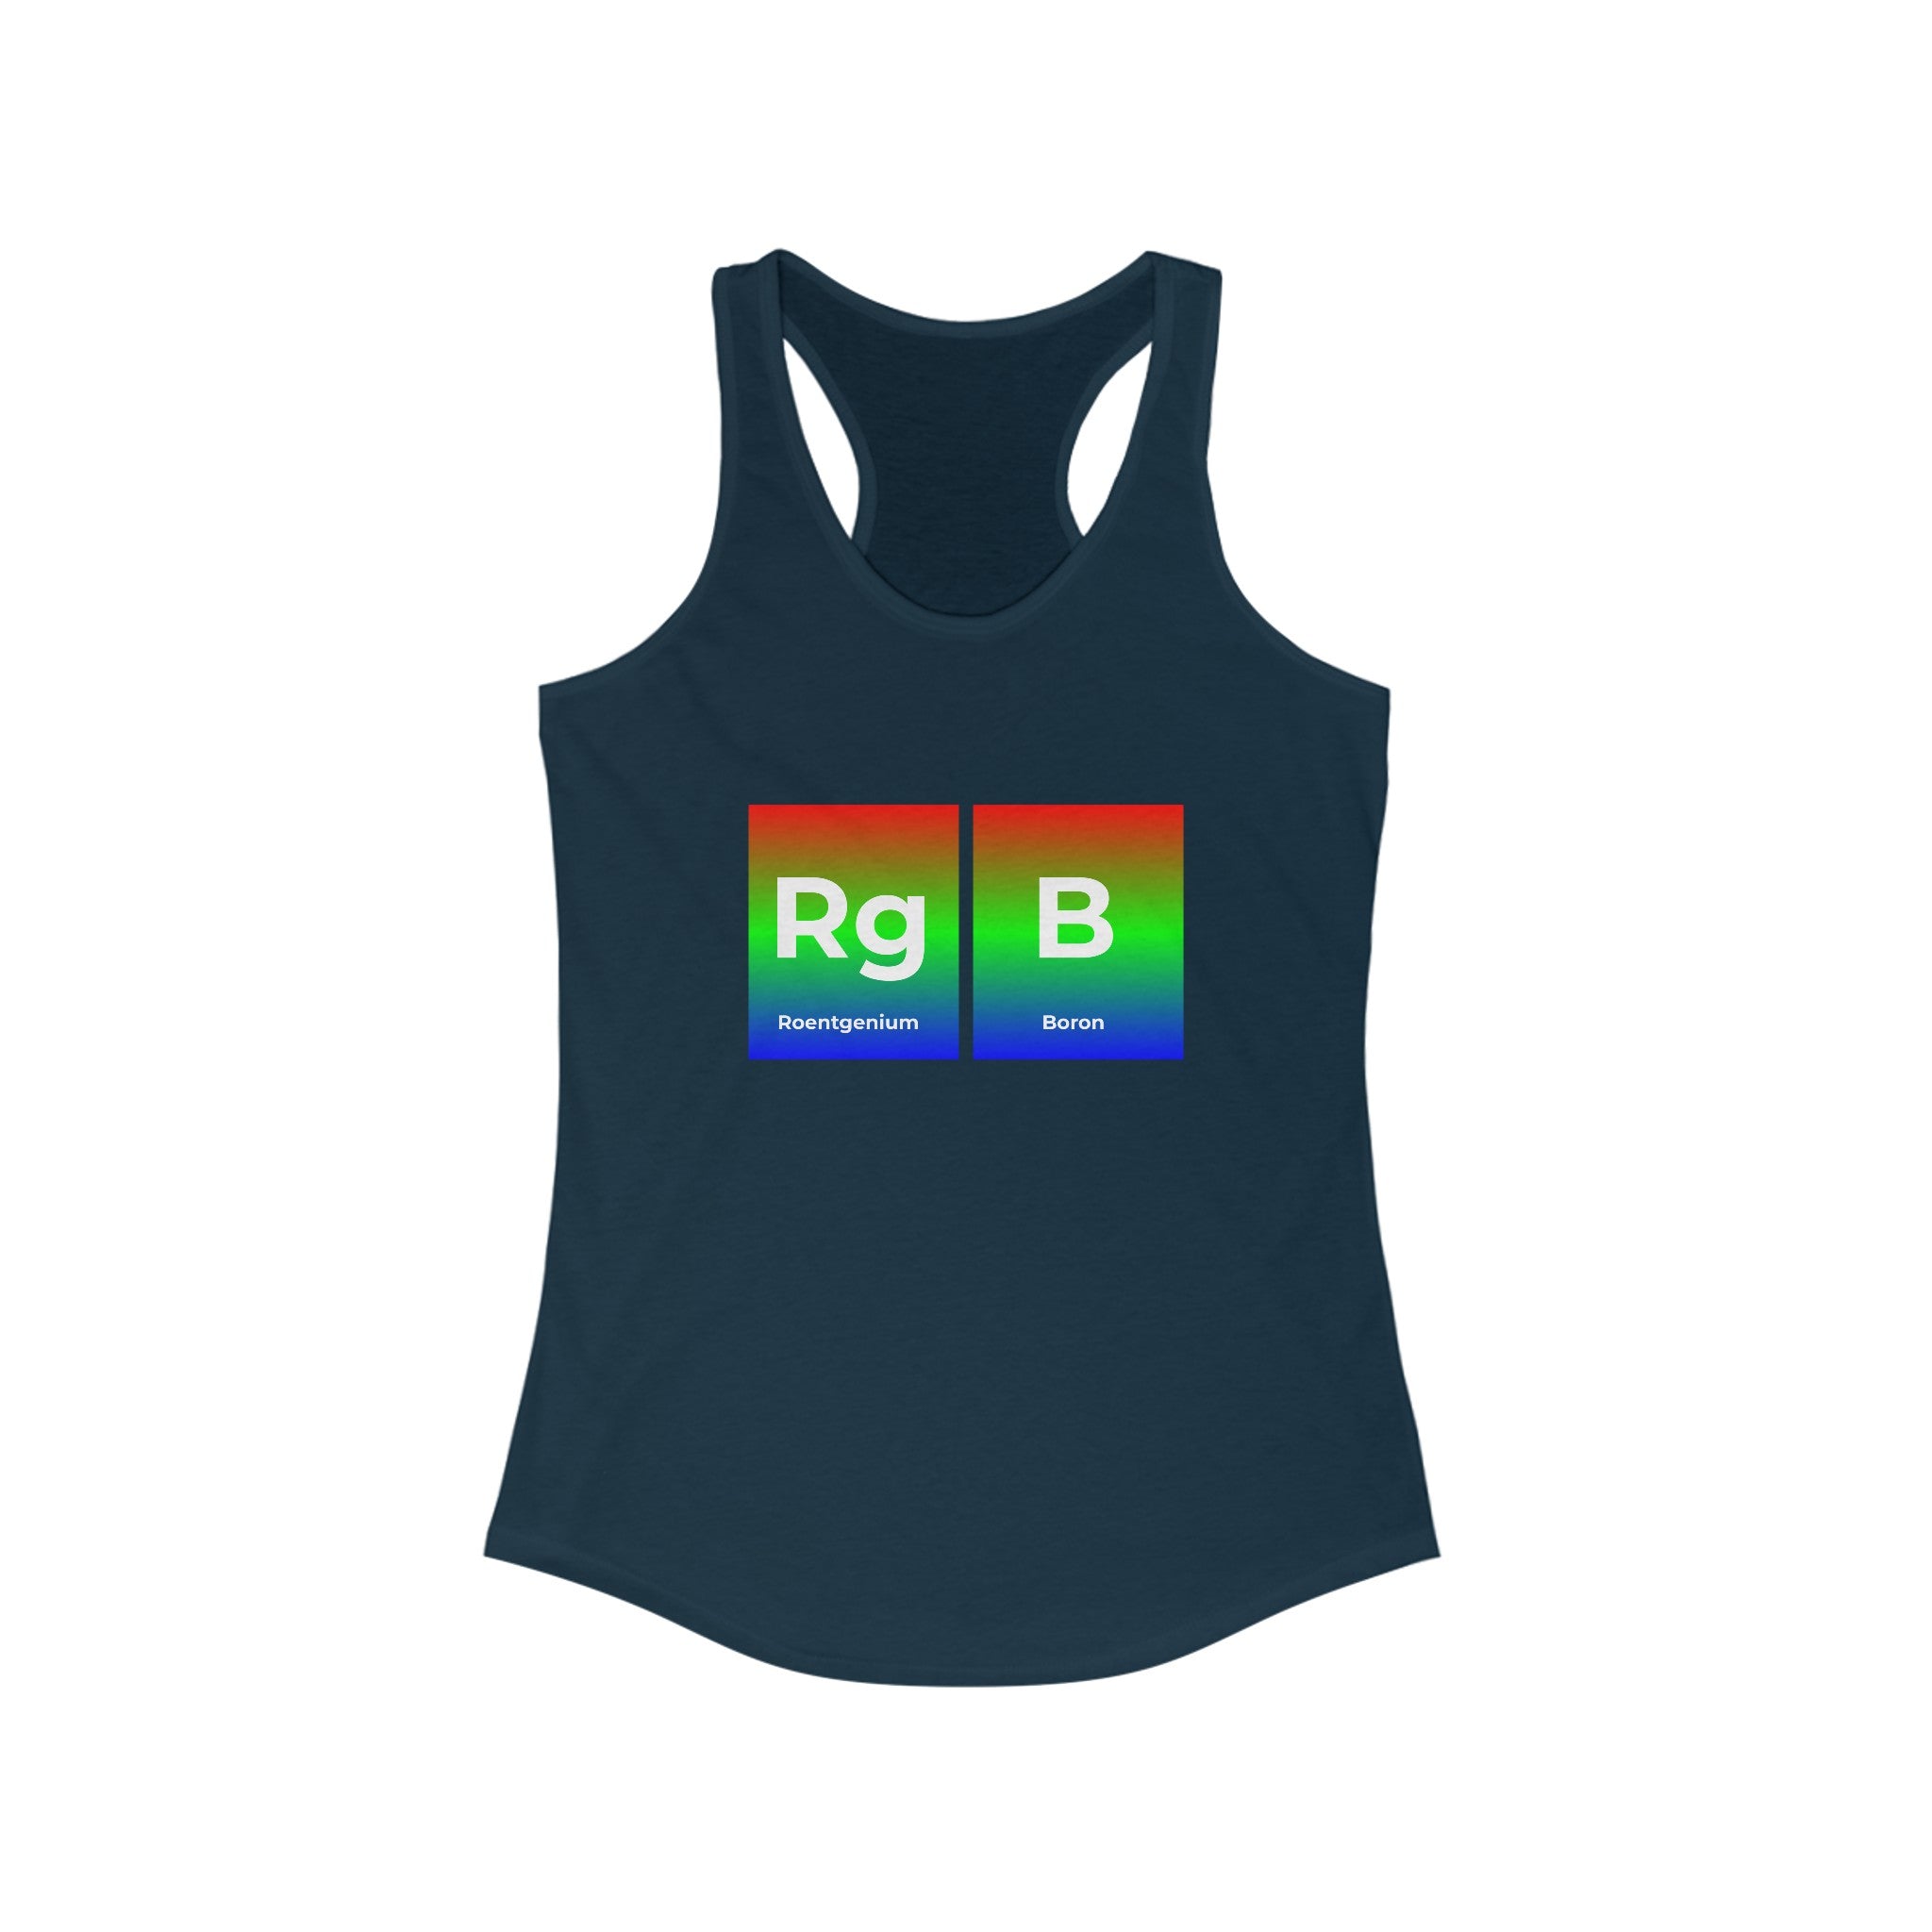 A high-quality navy RG-B - Women's Racerback Tank featuring a colorful, periodic table-style design with the elements Roentgenium (Rg) and Boron (B) labeled in RGB colors, perfect for an active lifestyle.